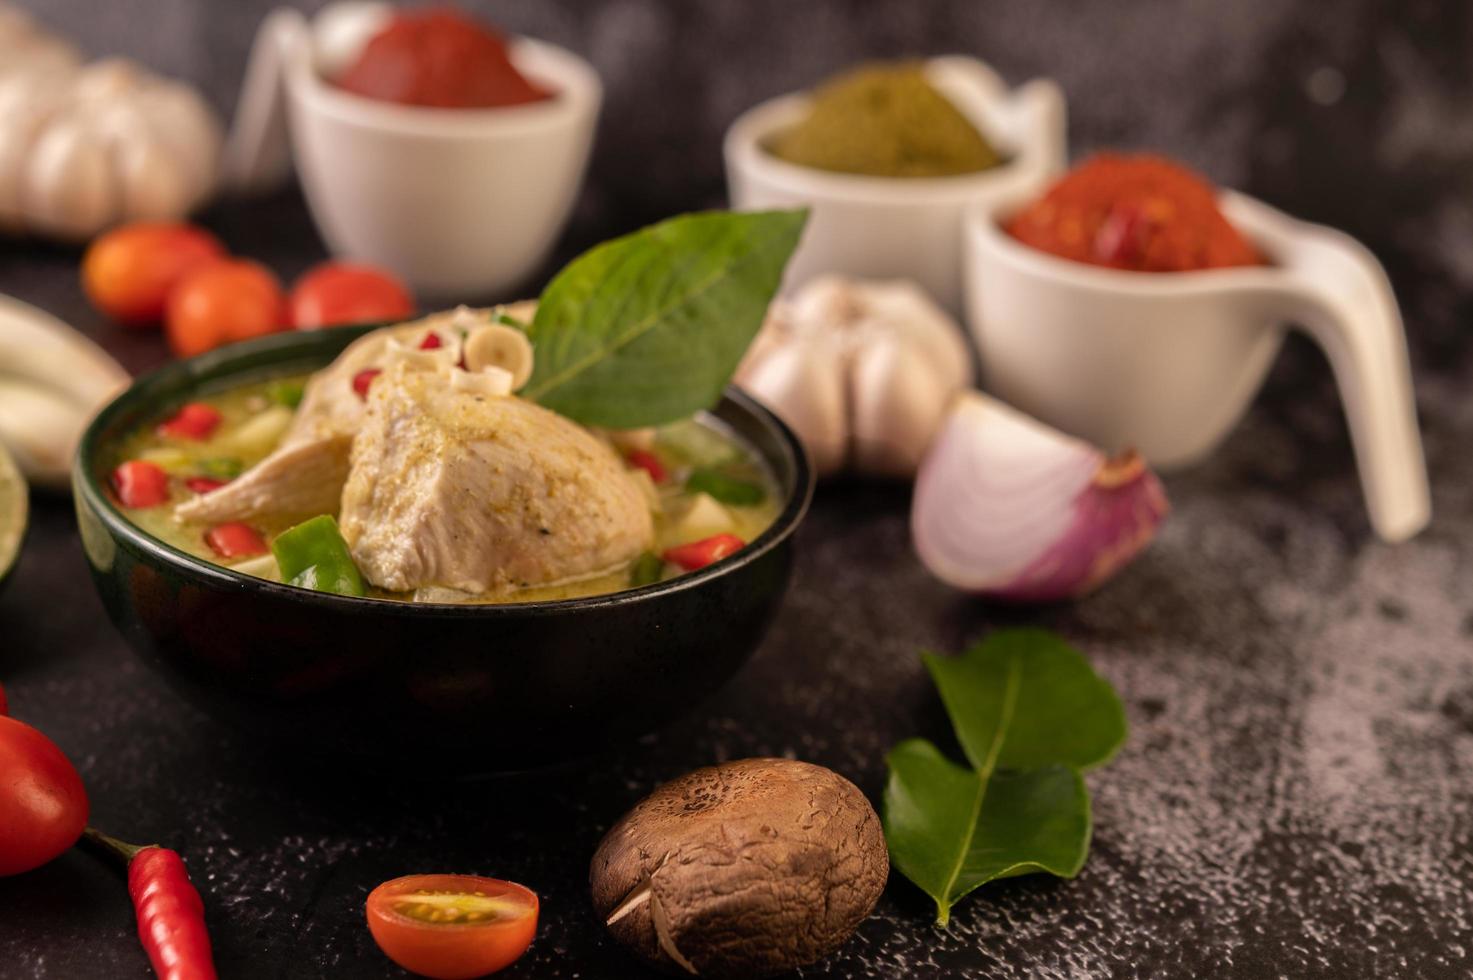 Green curry dish with chicken, chili and basil and tomato and lime photo